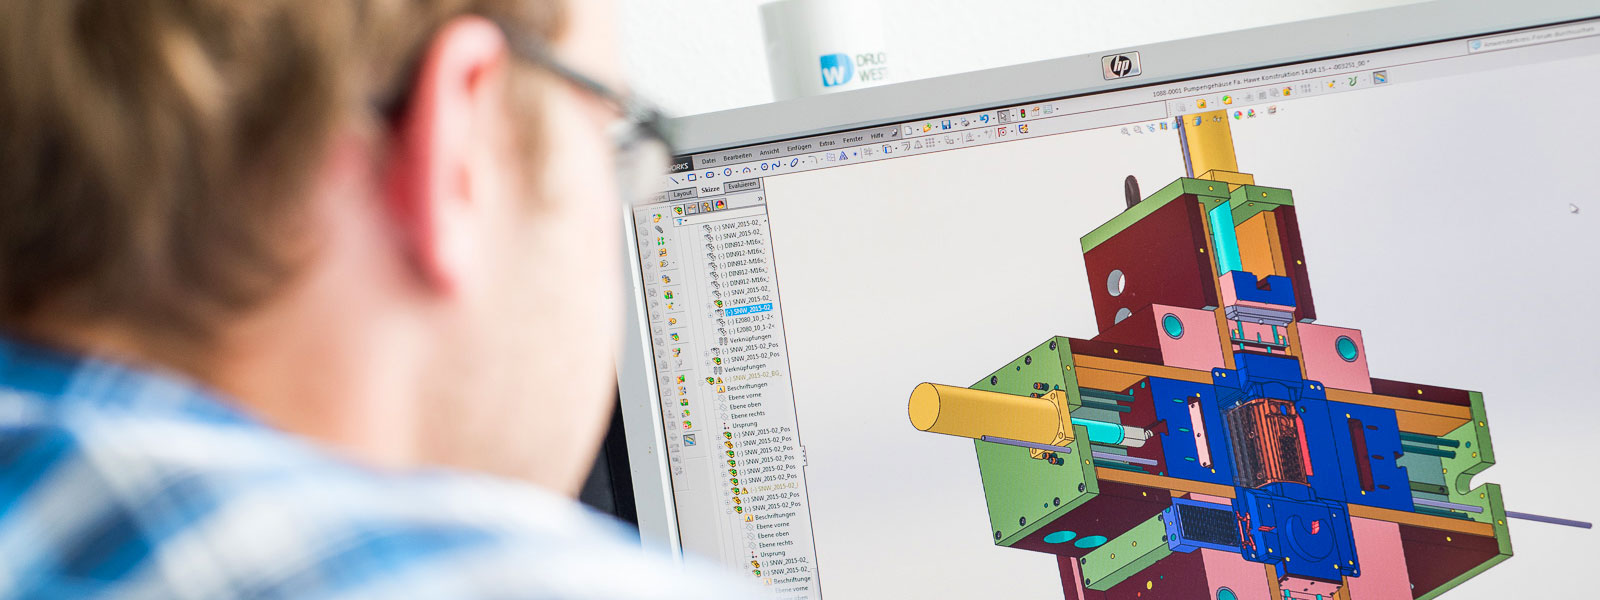 Employee in tool design in front of computer showing 3D image of die casting tool